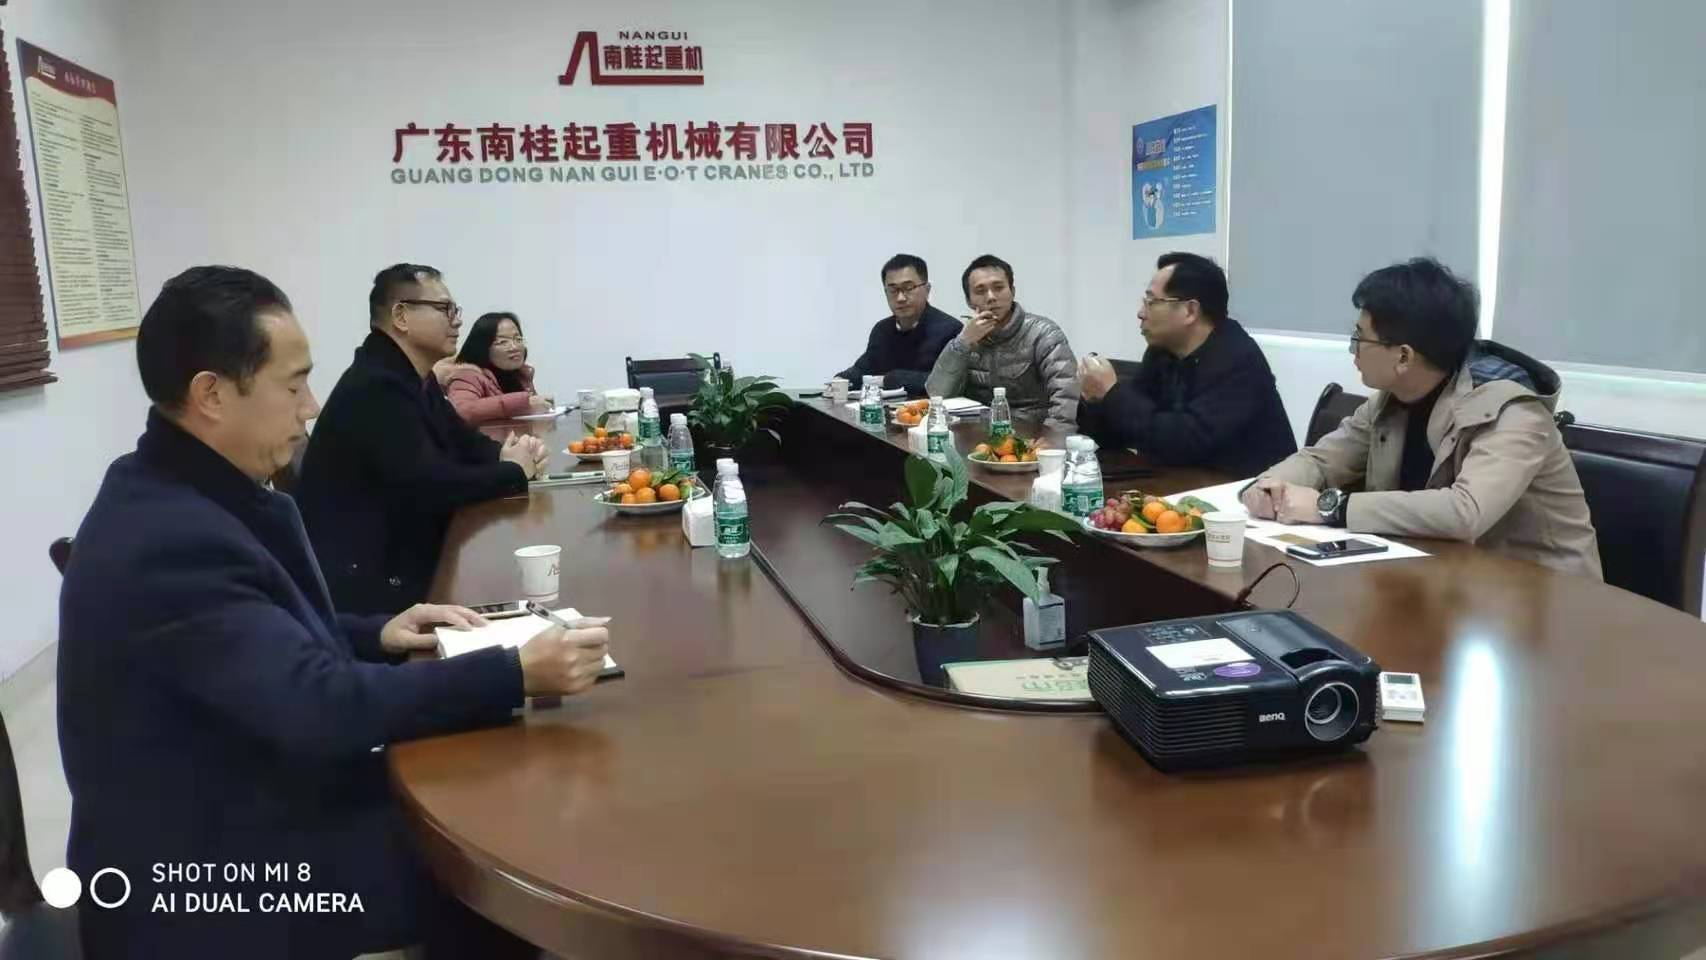 On December 31, 2020, the deputy head of Sanshui District——Yang Weiliang came to our company for investigation